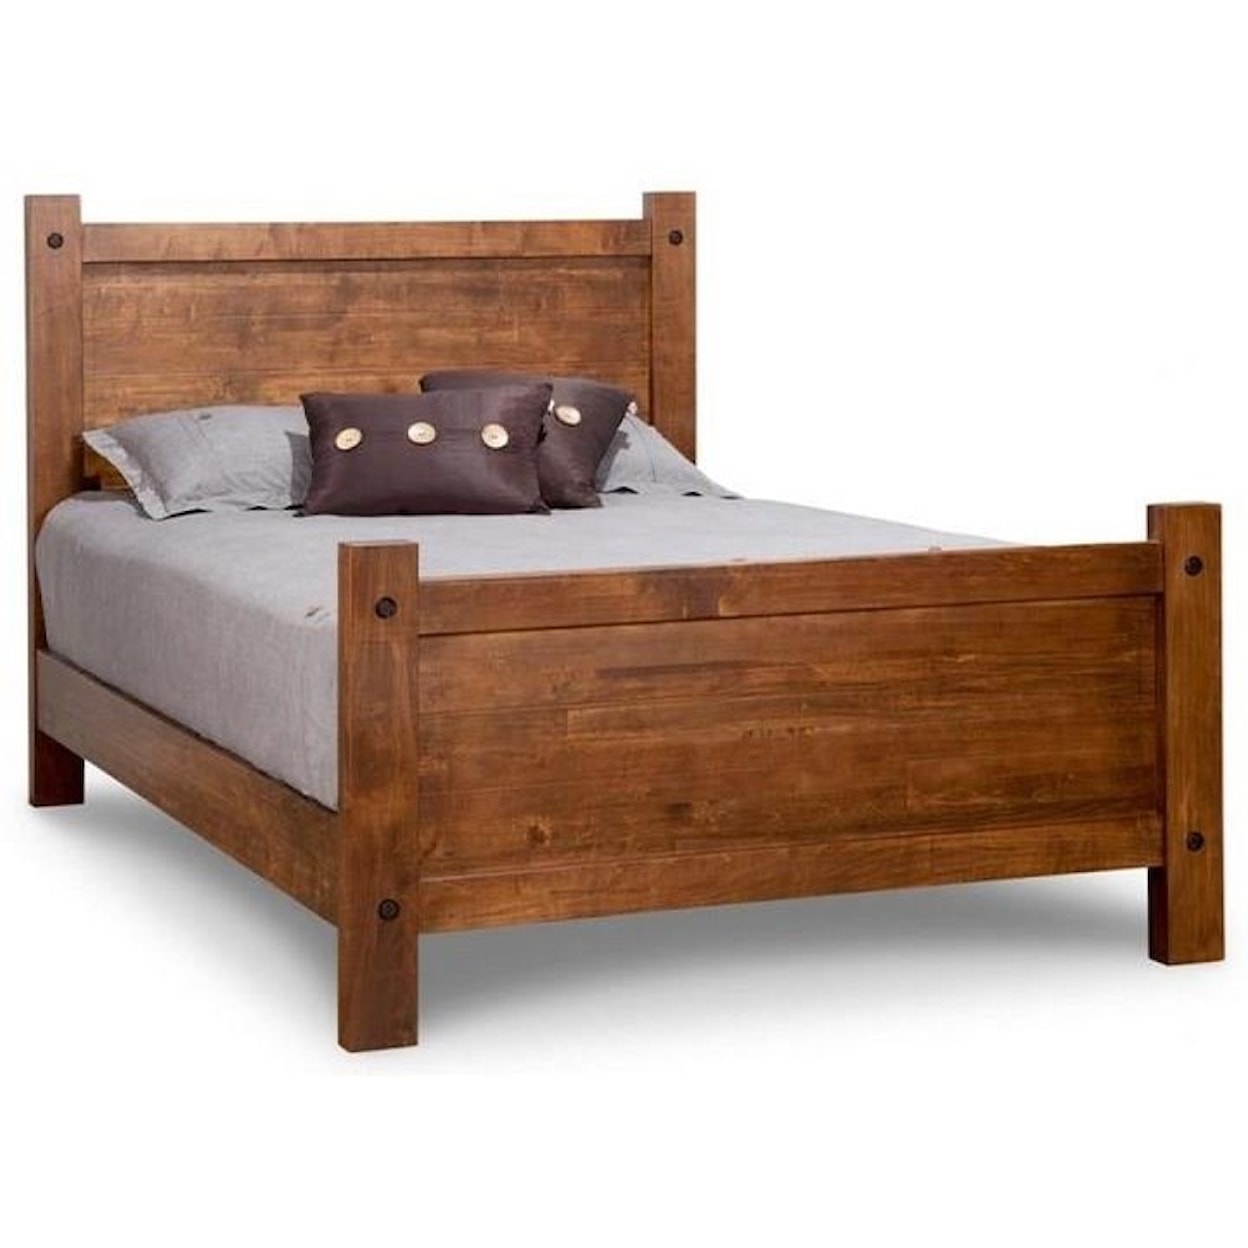 Handstone Rafters King Bed